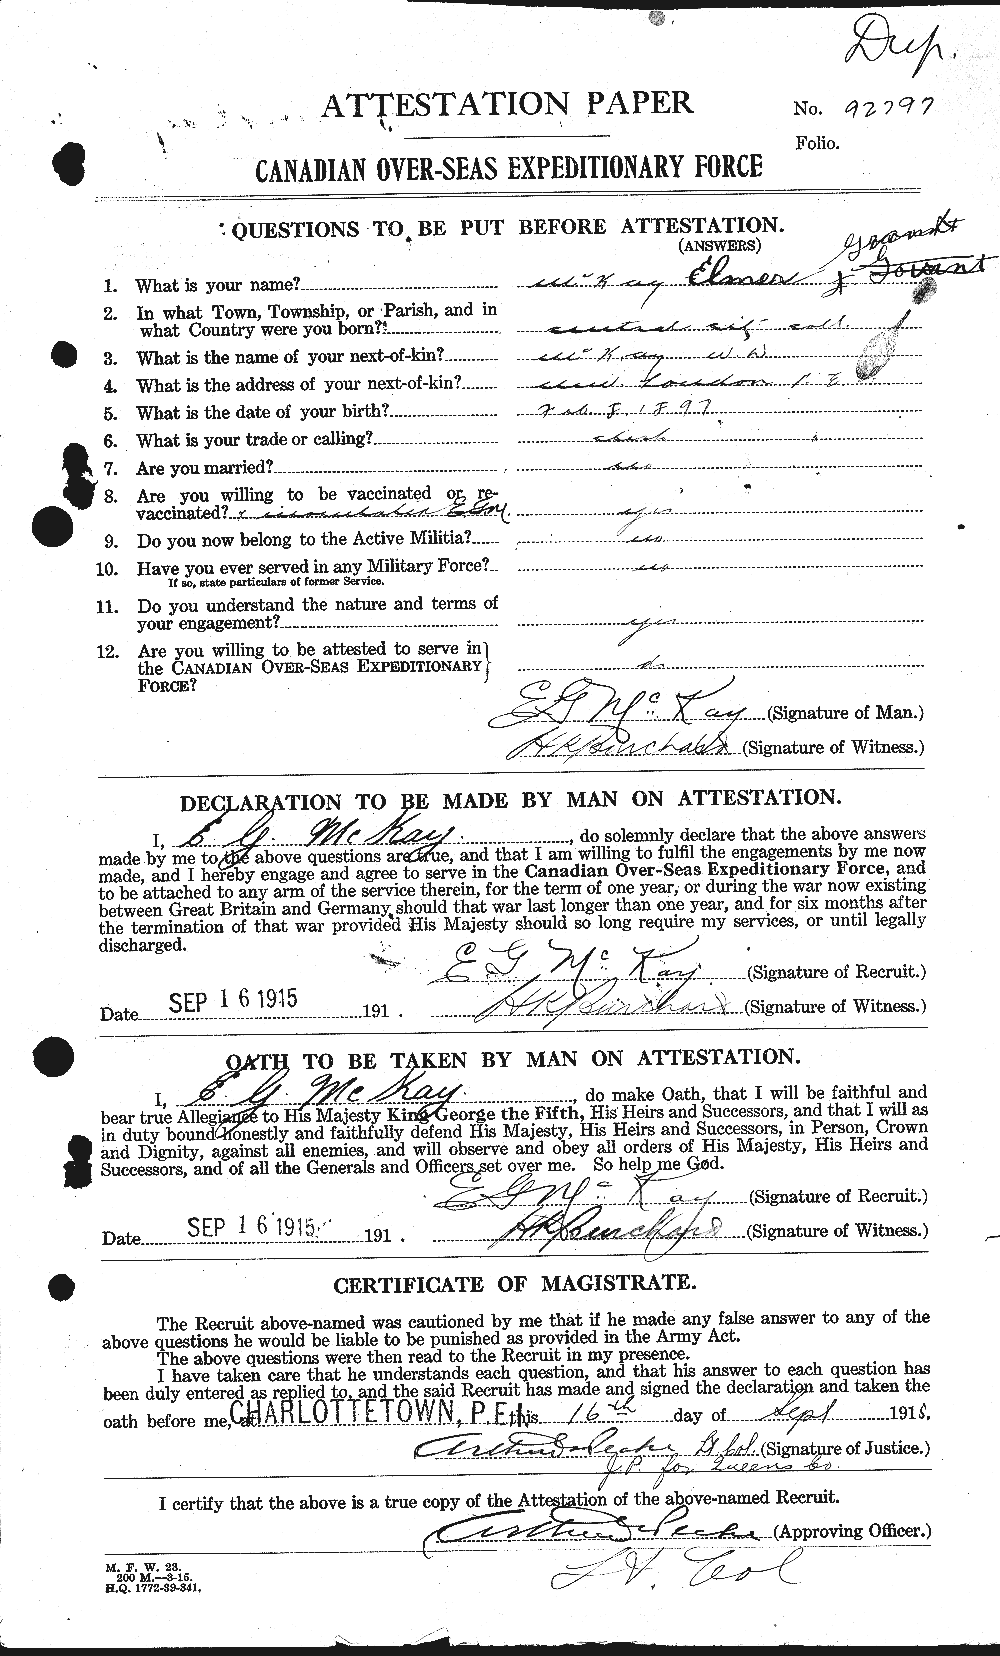 Personnel Records of the First World War - CEF 534582a